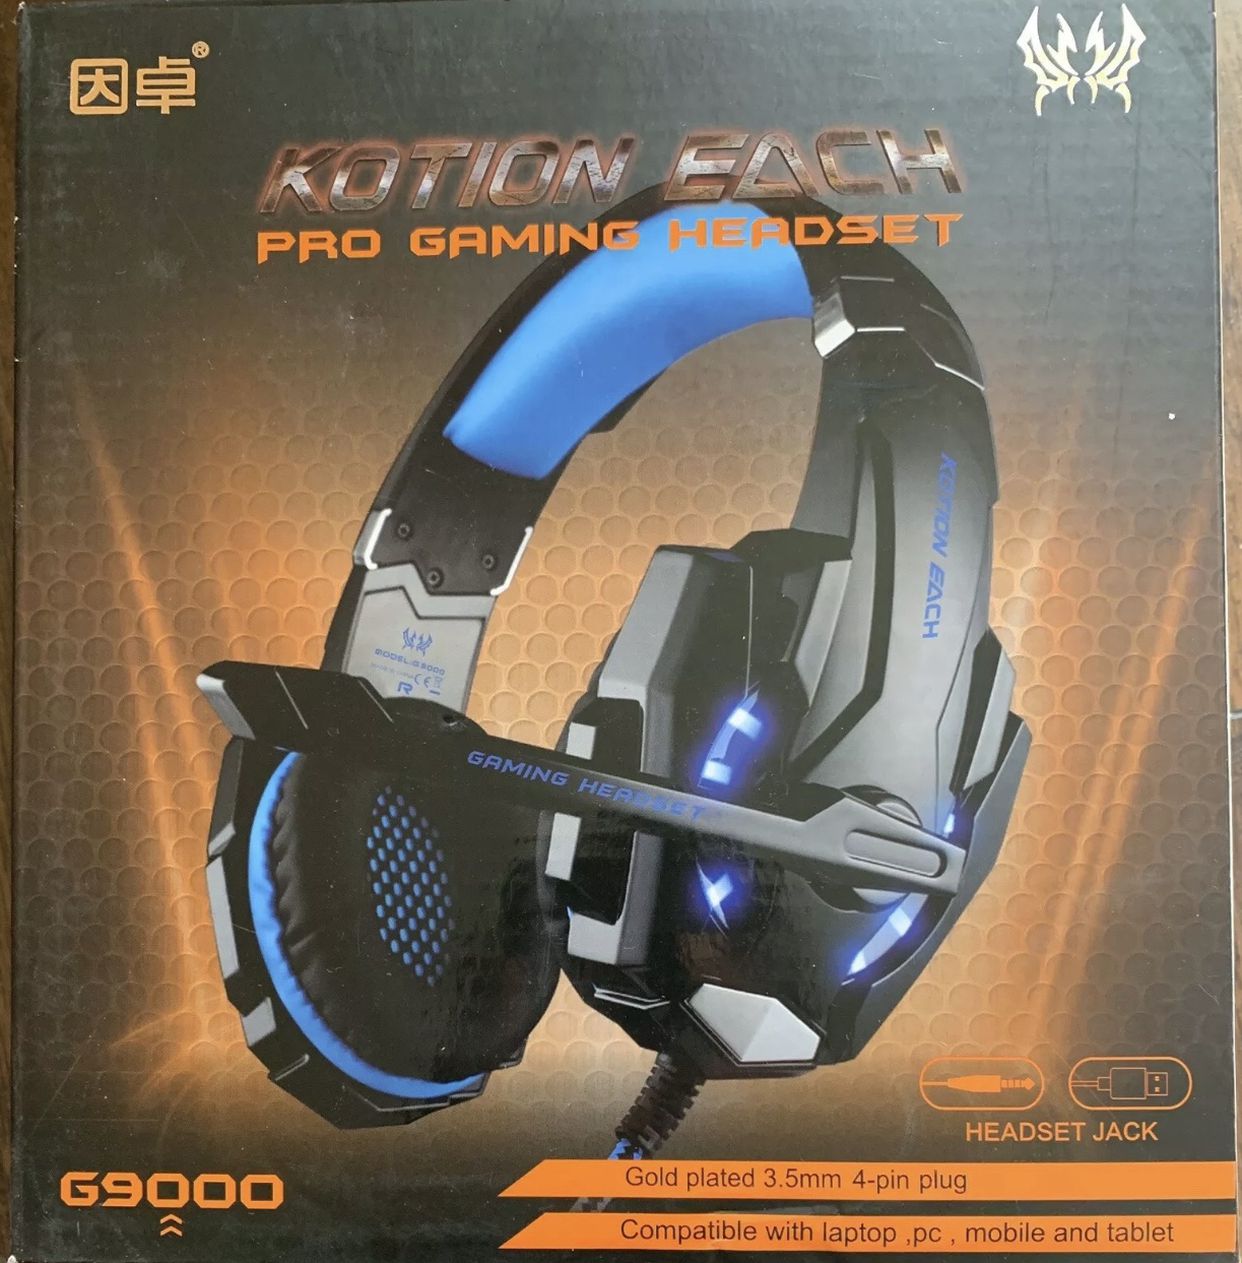 KOTION EACH Pro Gaming Headset G9000 Gold plated 3.5mm 4-pin plug